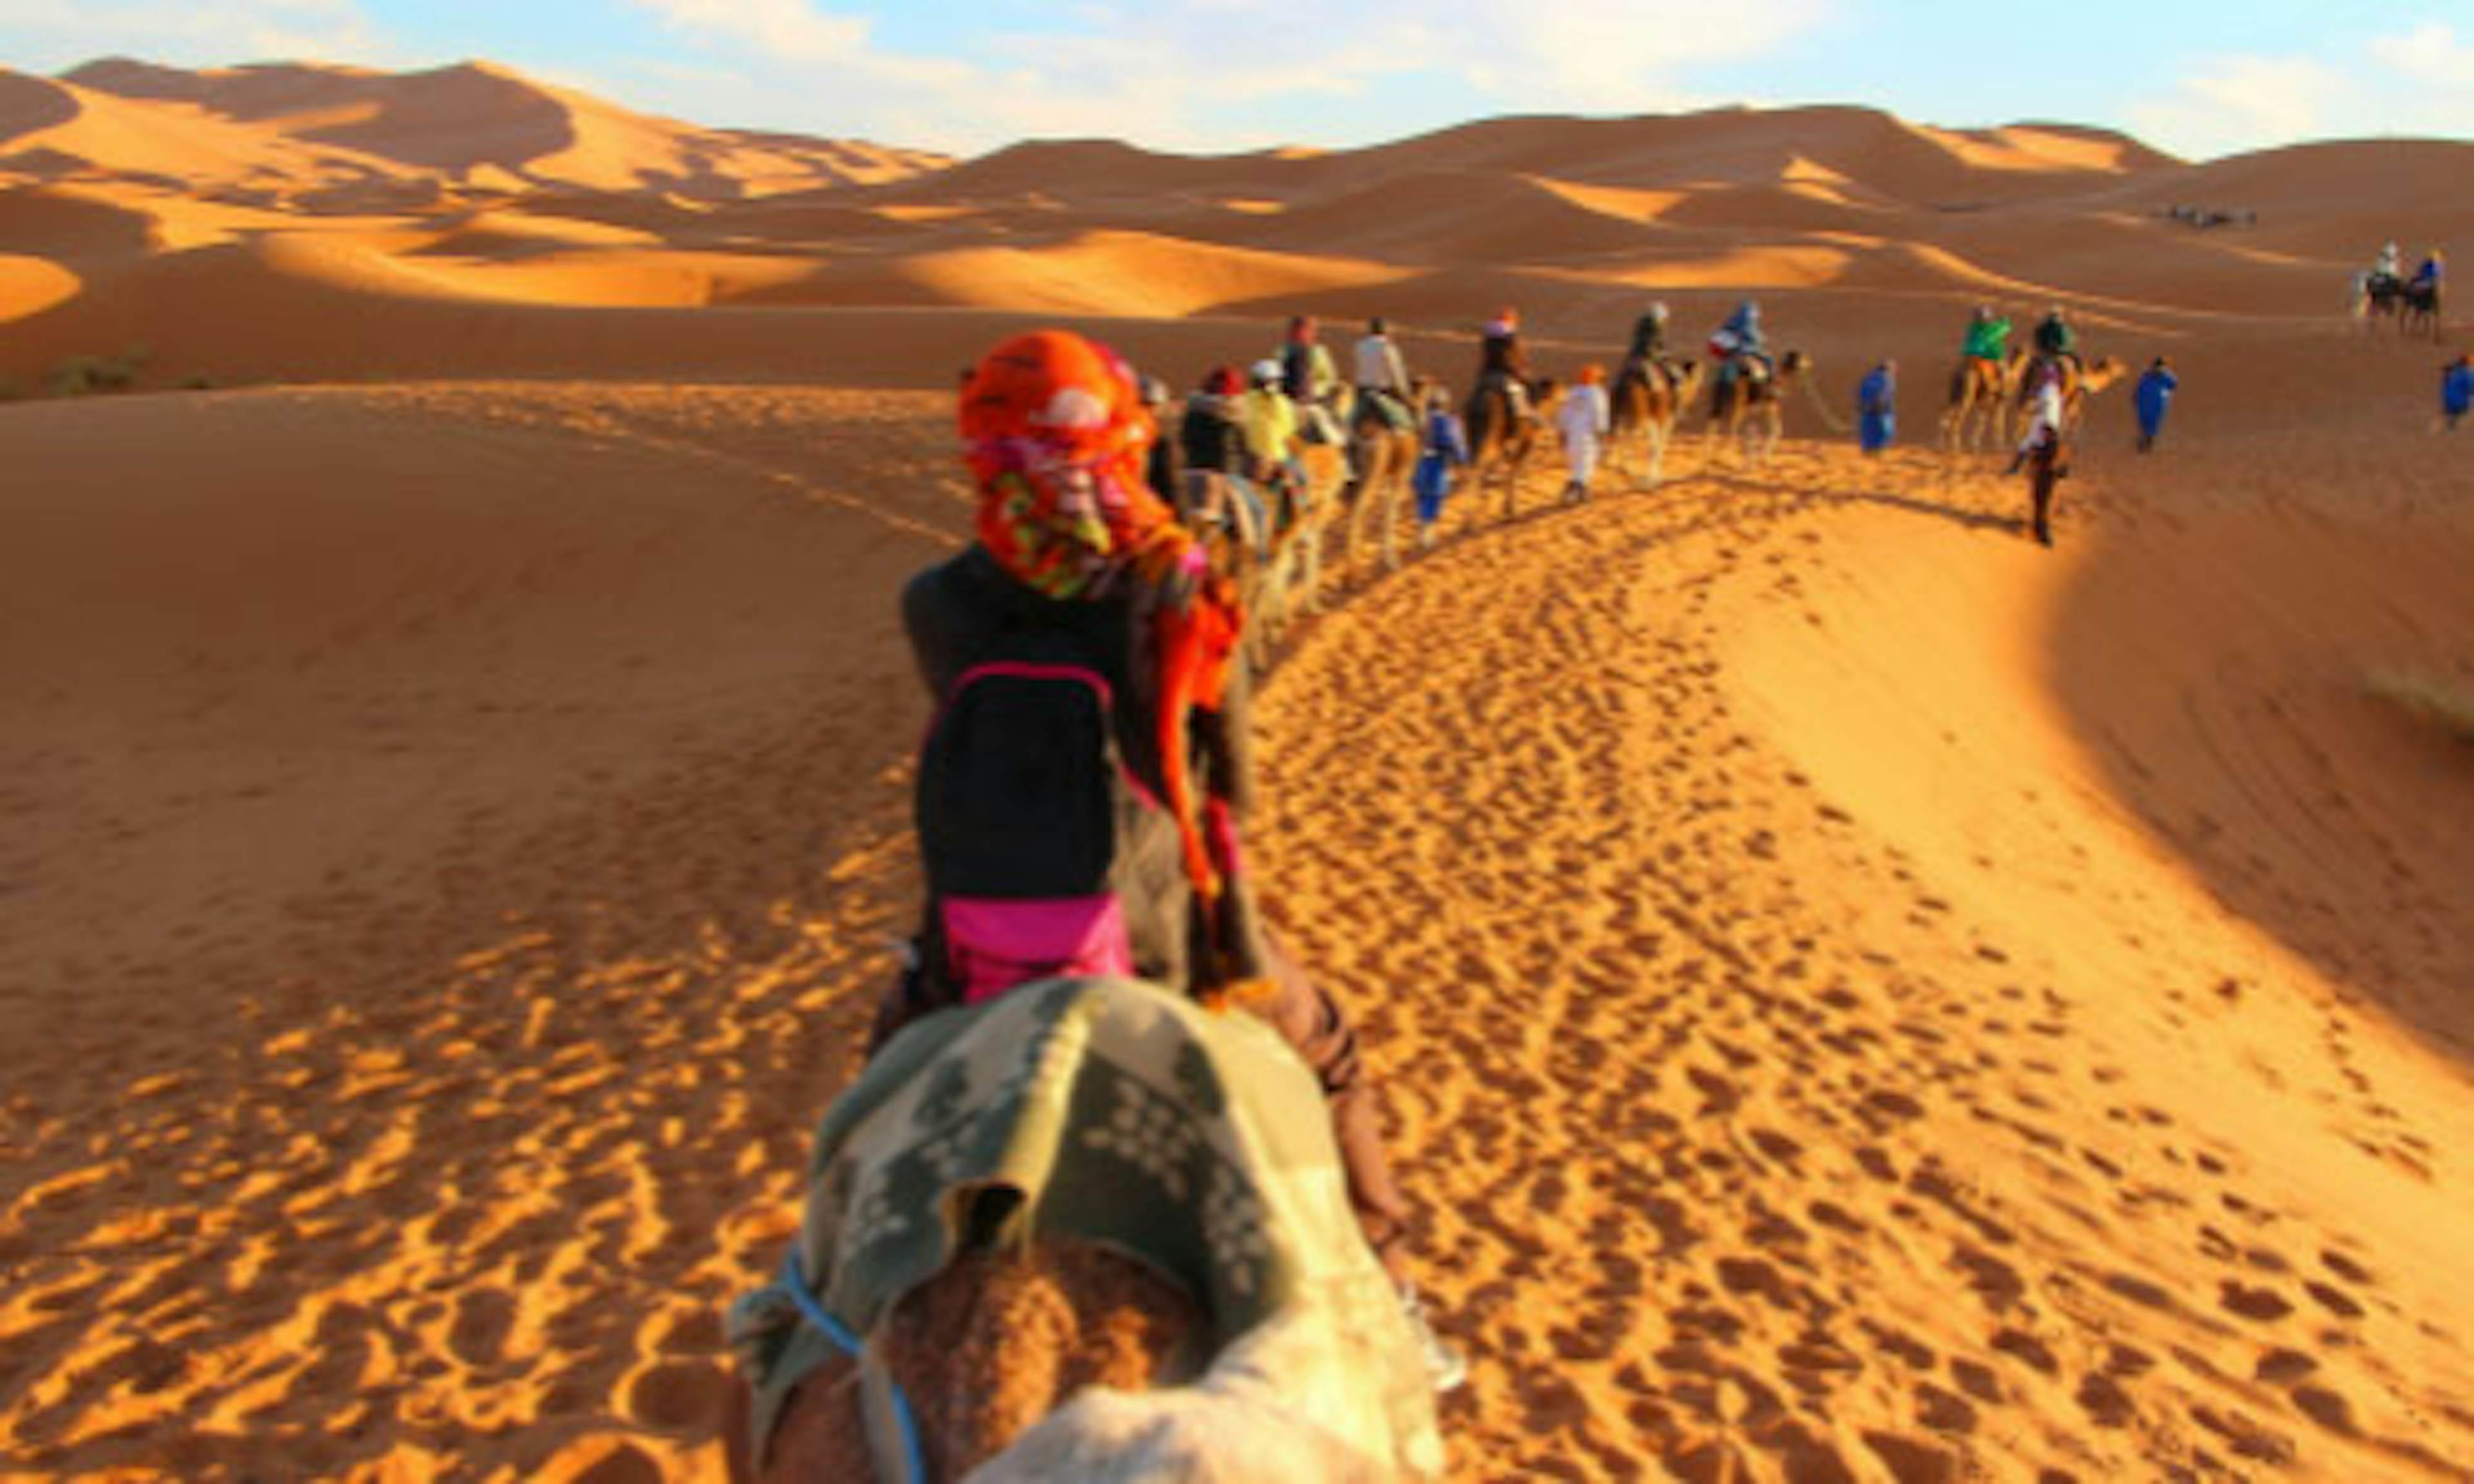 A view from the back of a camel, looking straight ahead at the chain of camel riders in front. Riding over sunlit dunes in the Sahara desert.